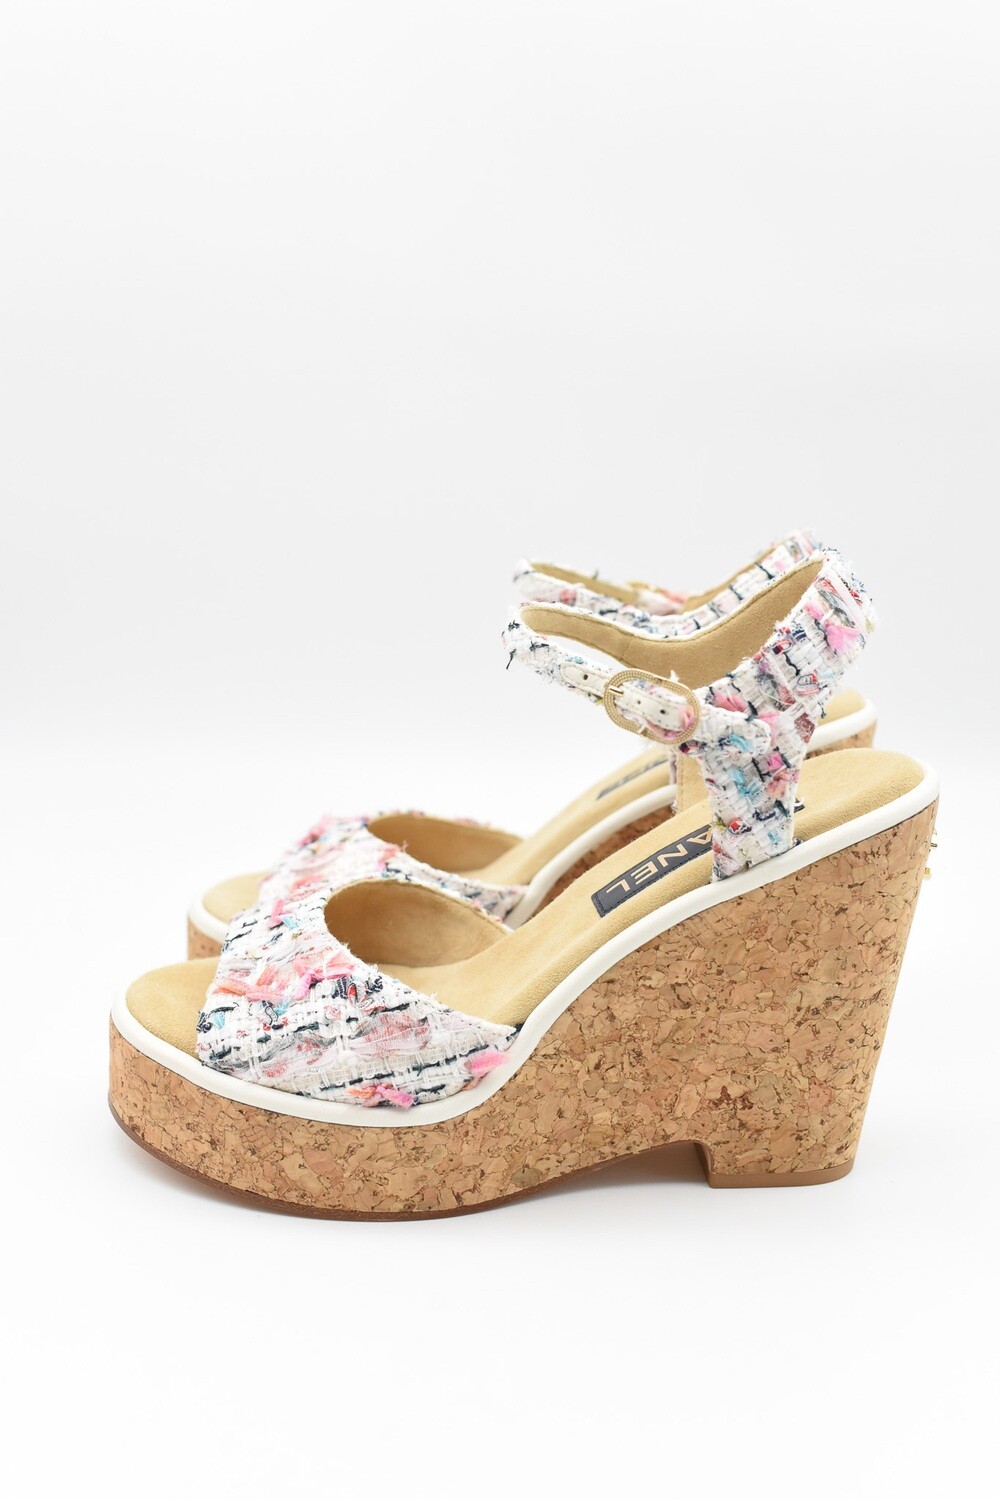 Chanel Shoes Tweed Wedges, Multicolor, Size 40, New in Box GA006